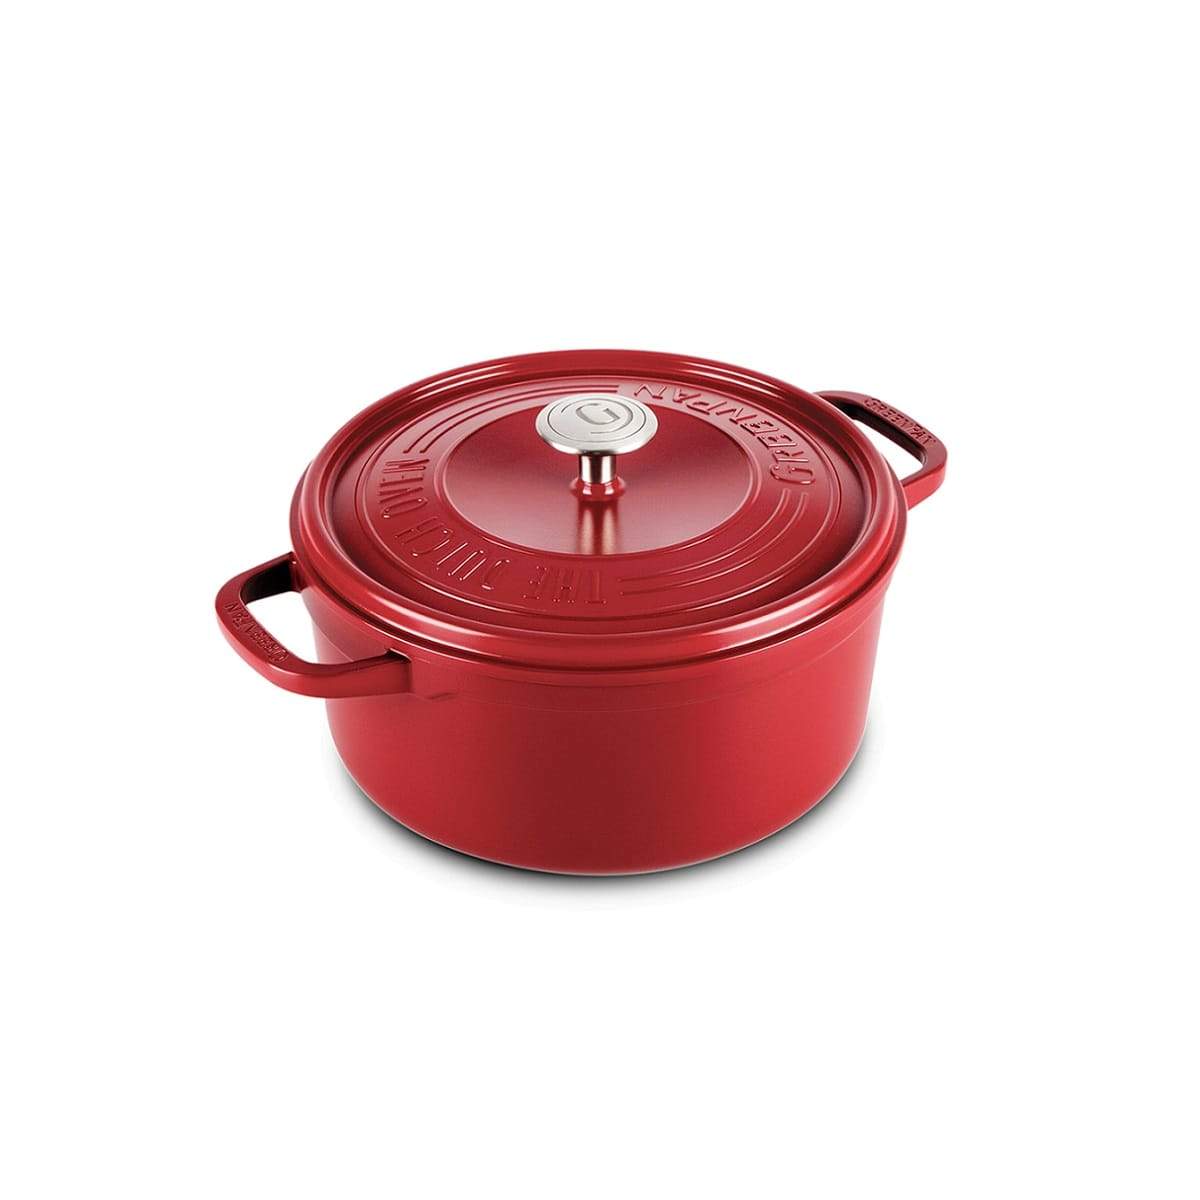 CC005554-001 - Featherweights Casserole with Lid, Scarlet Red - 24cm - Product Image 1